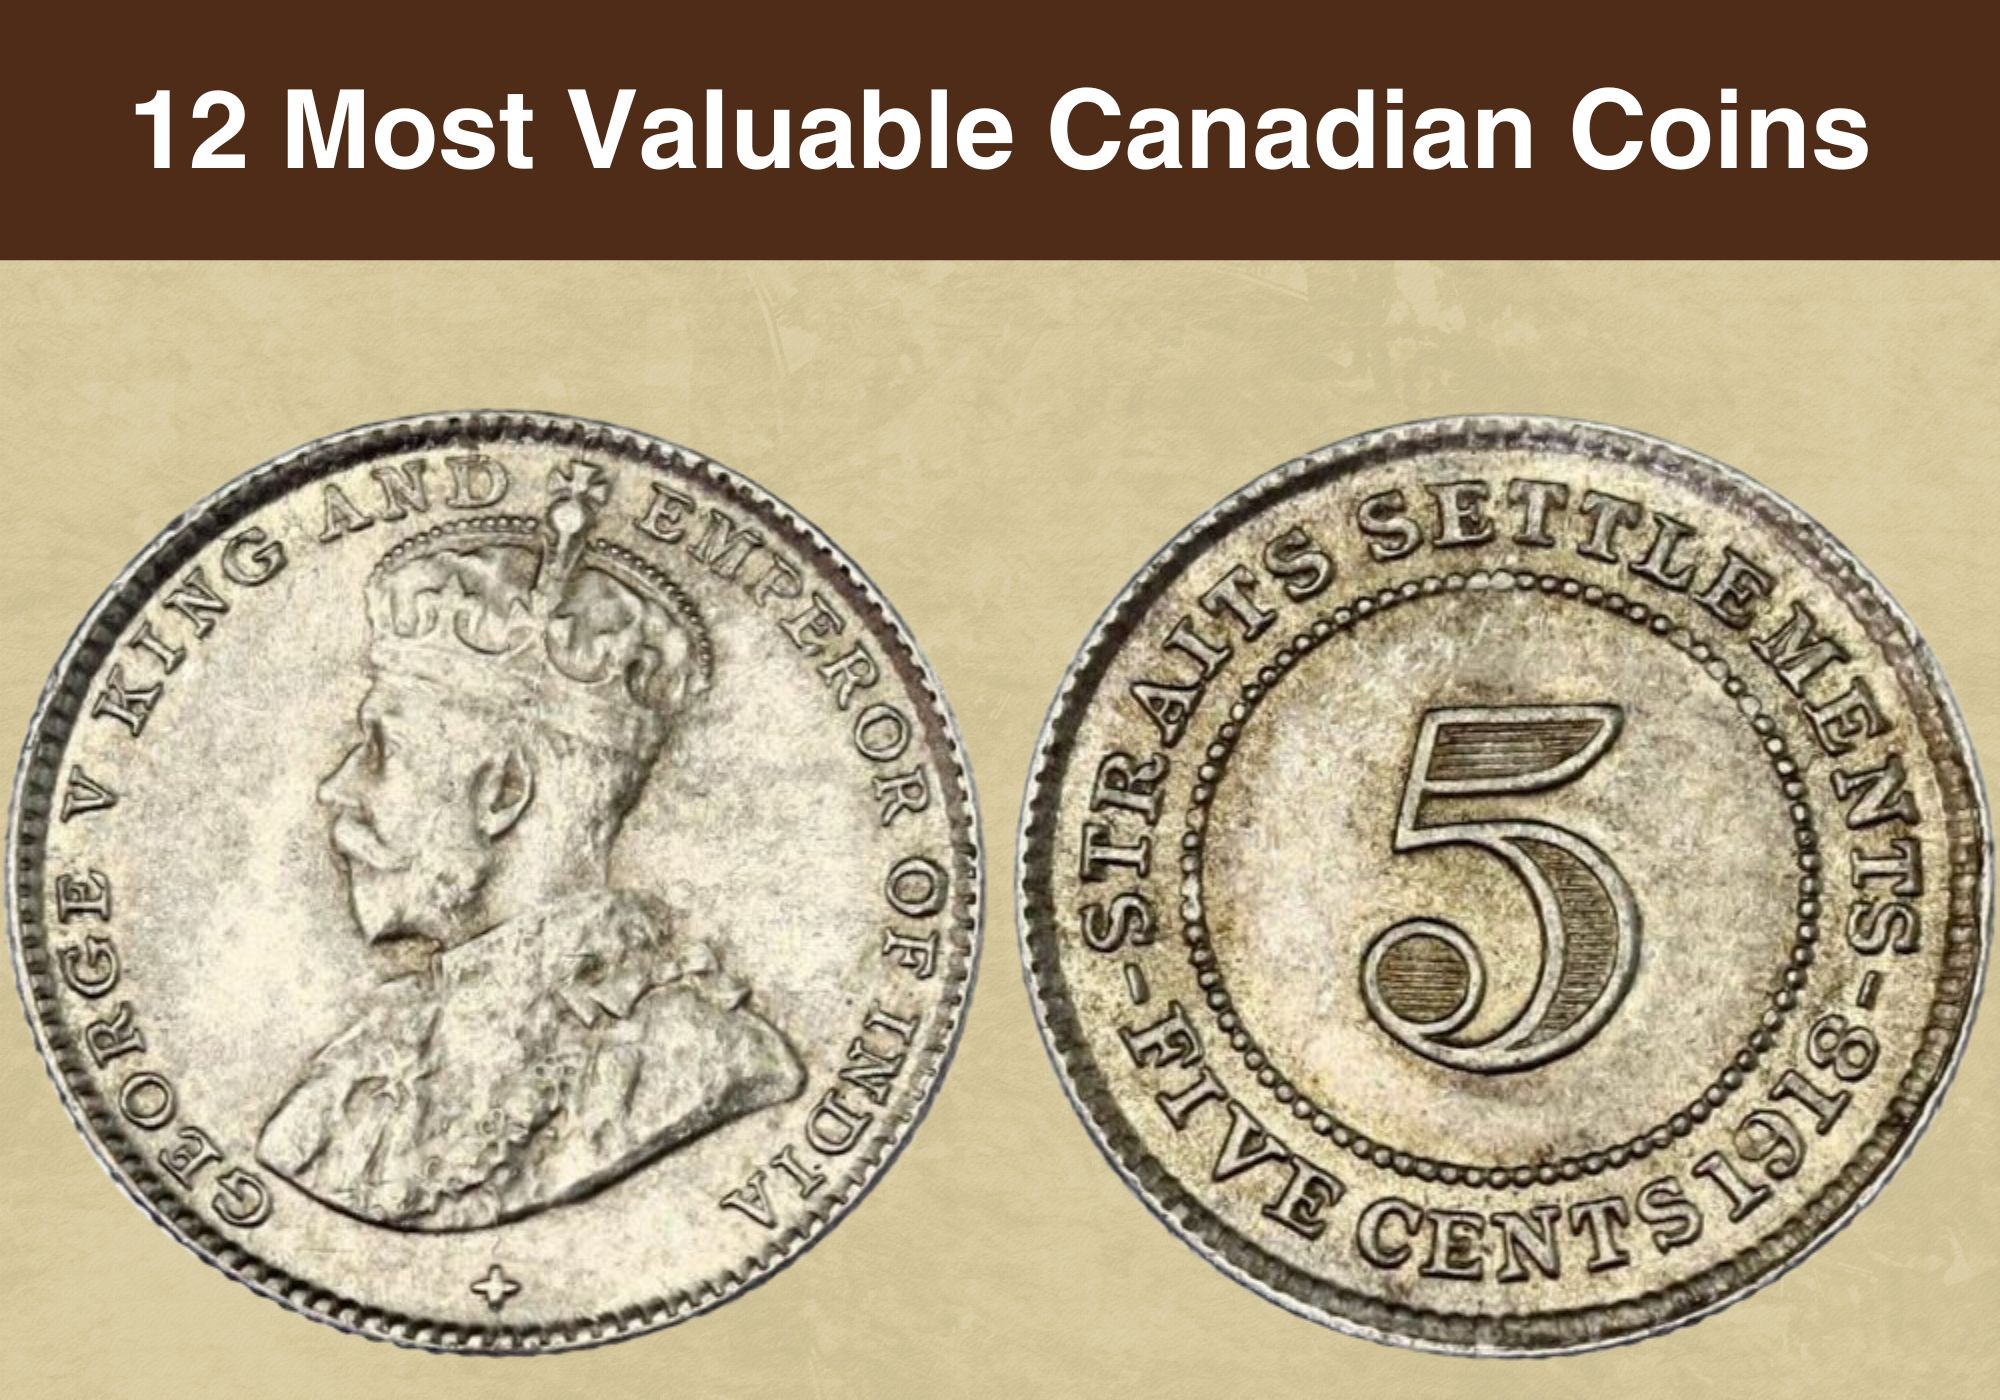 10 EXTREMELY VALUABLE CANADIAN COINS WORTH MONEY - RARE CANADIAN